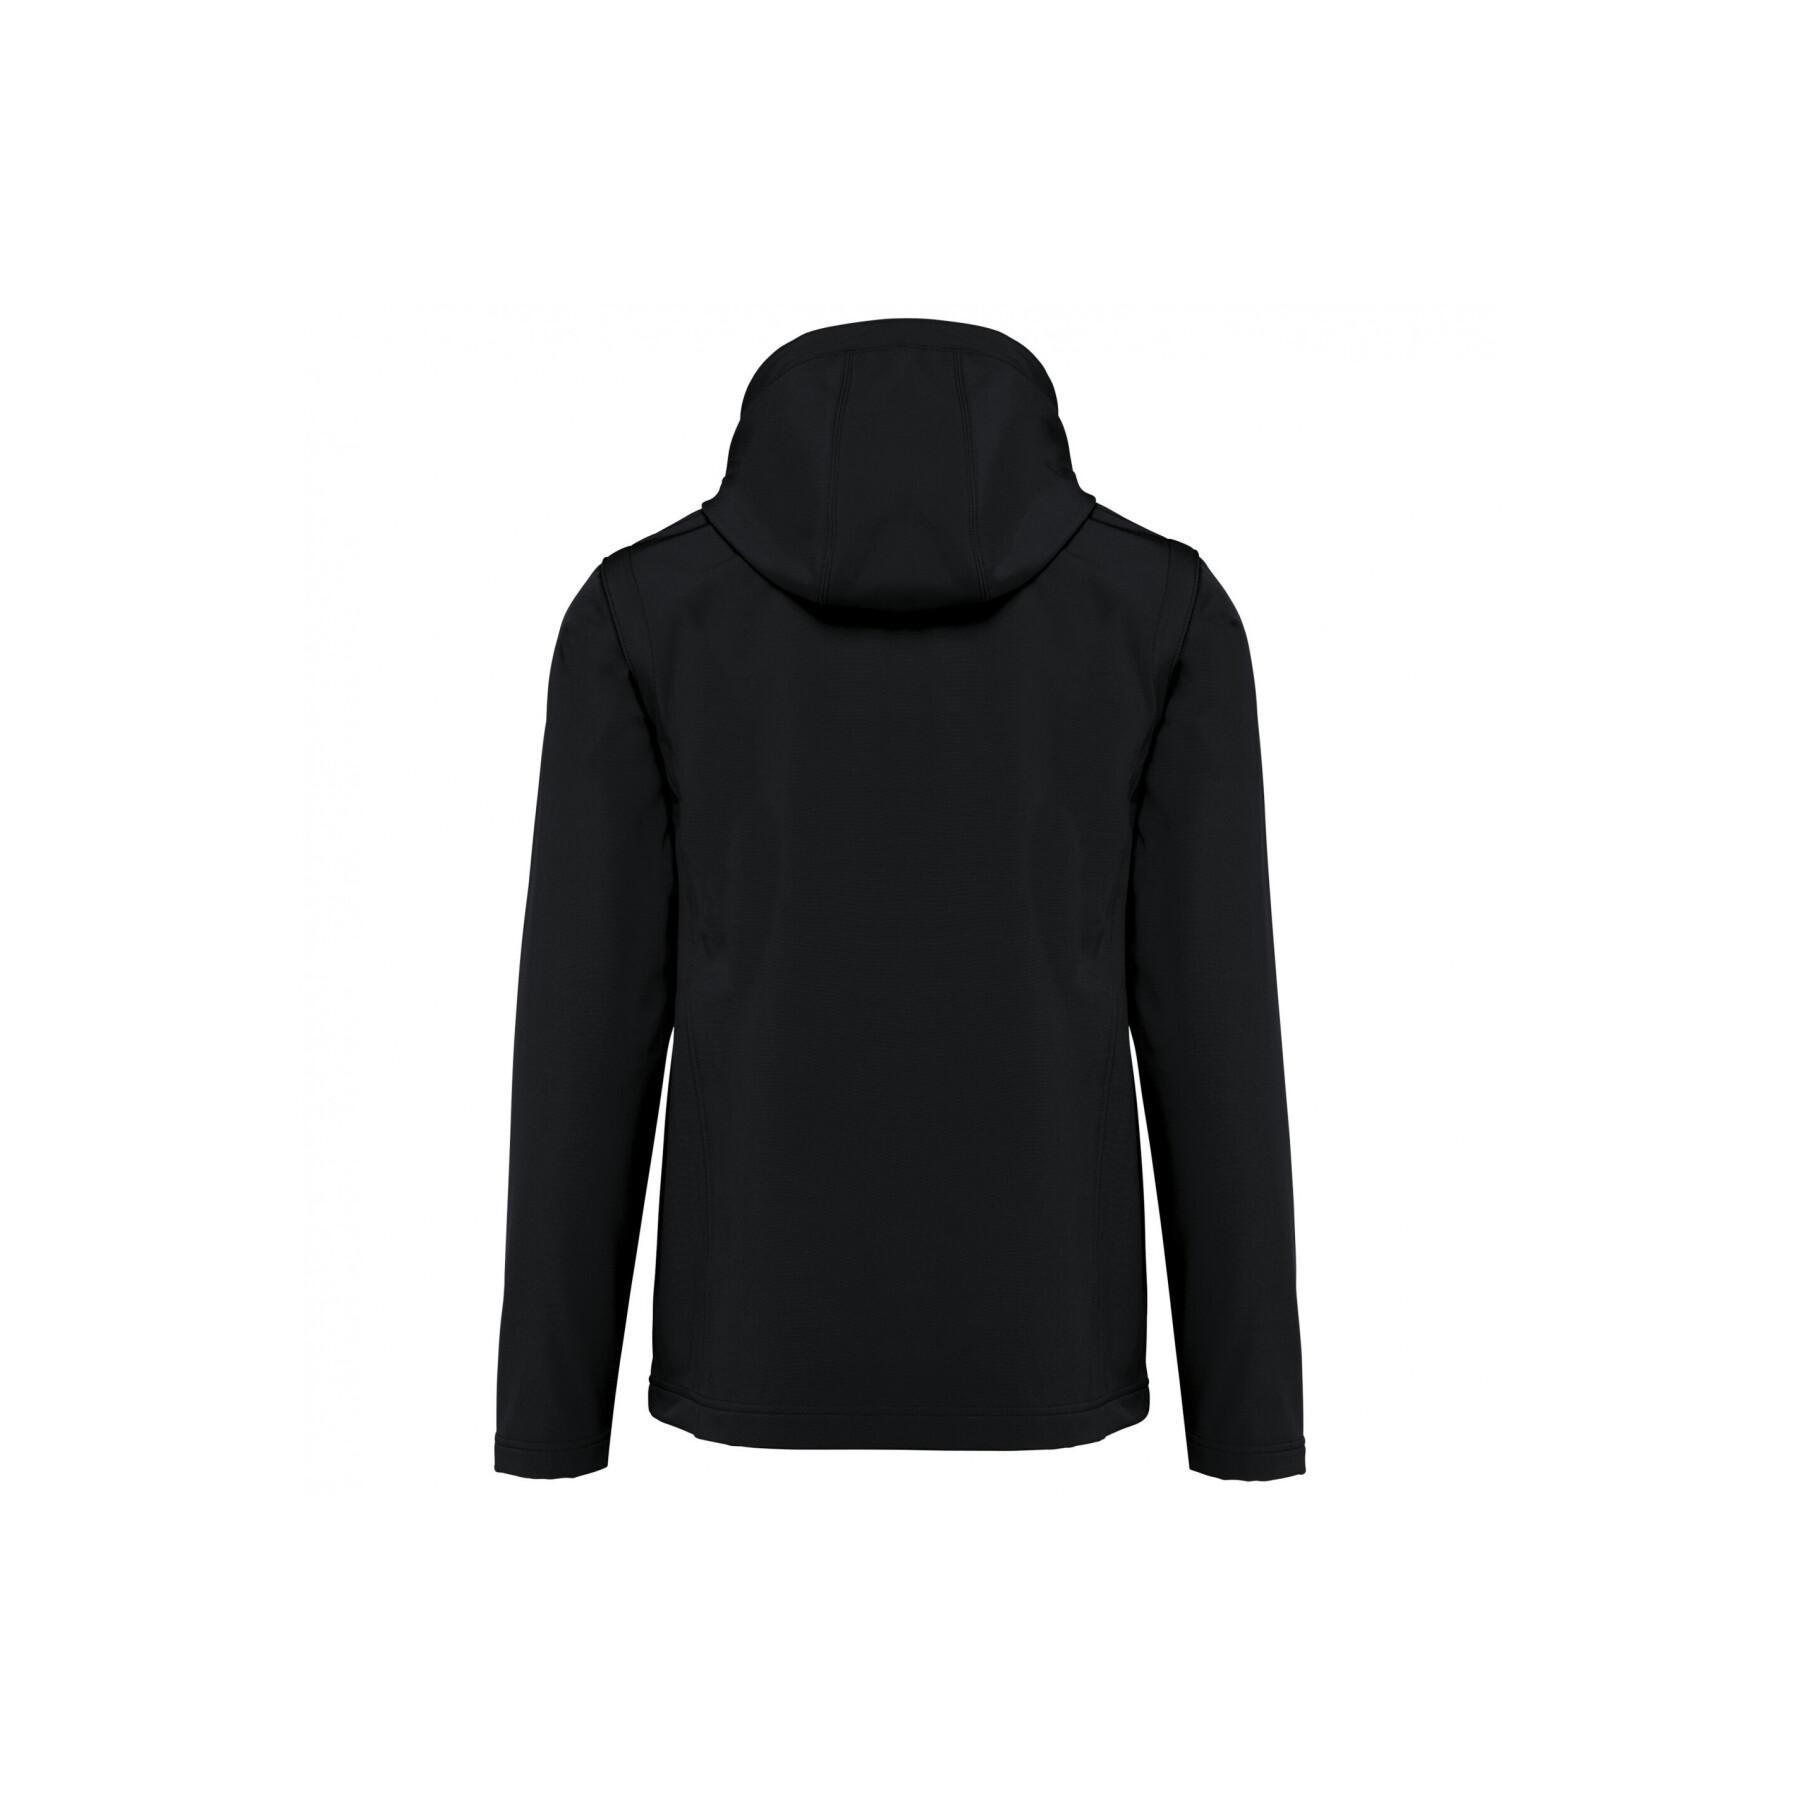 3-layer hooded jacket with removable sleeves Kariban Softshell